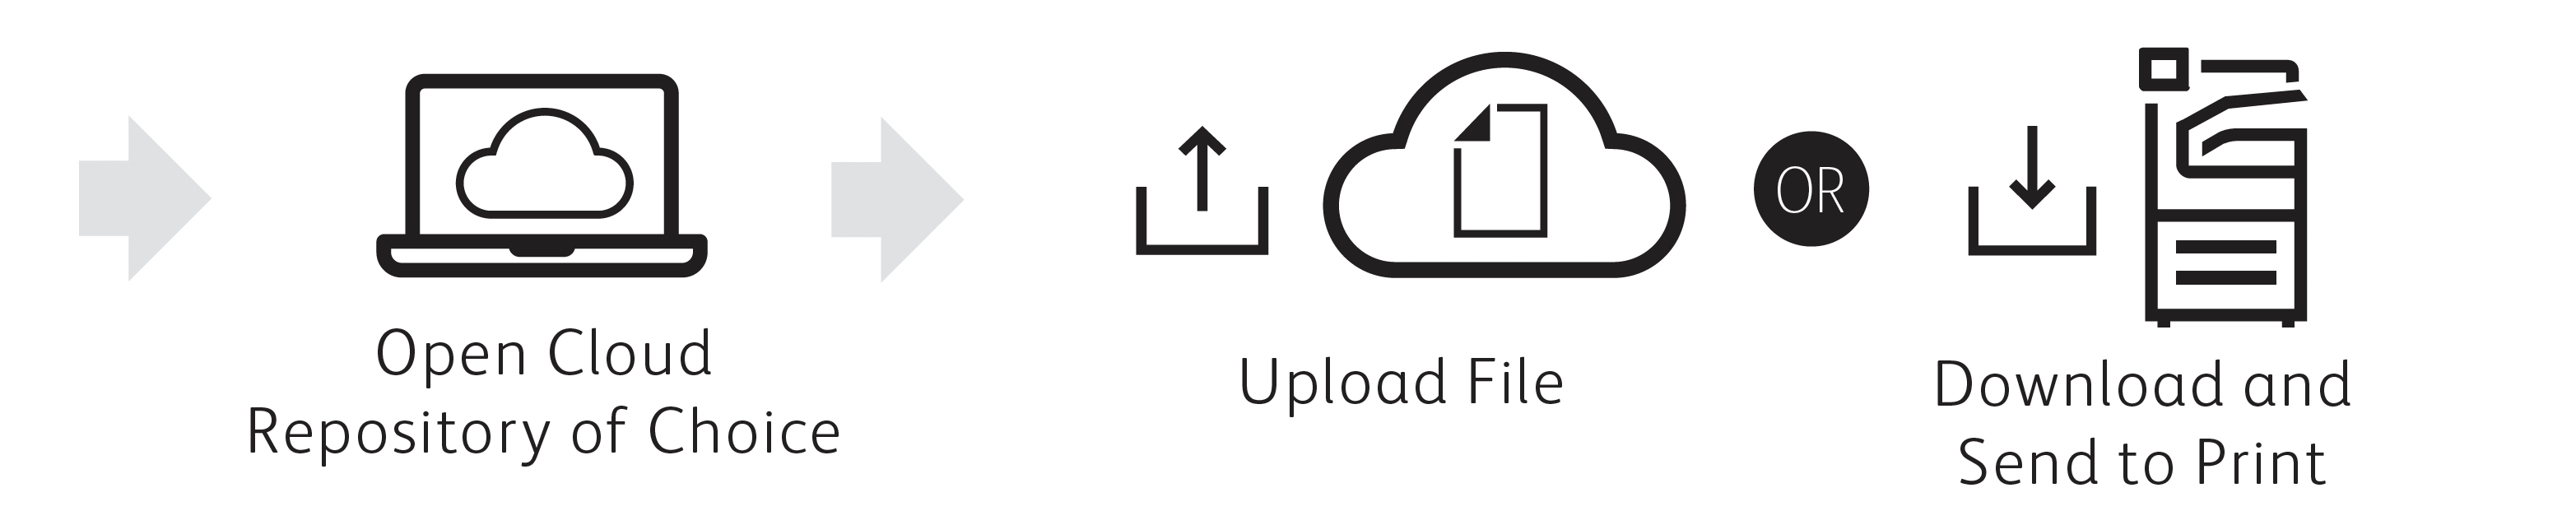 Uploading files to the Cloud 2